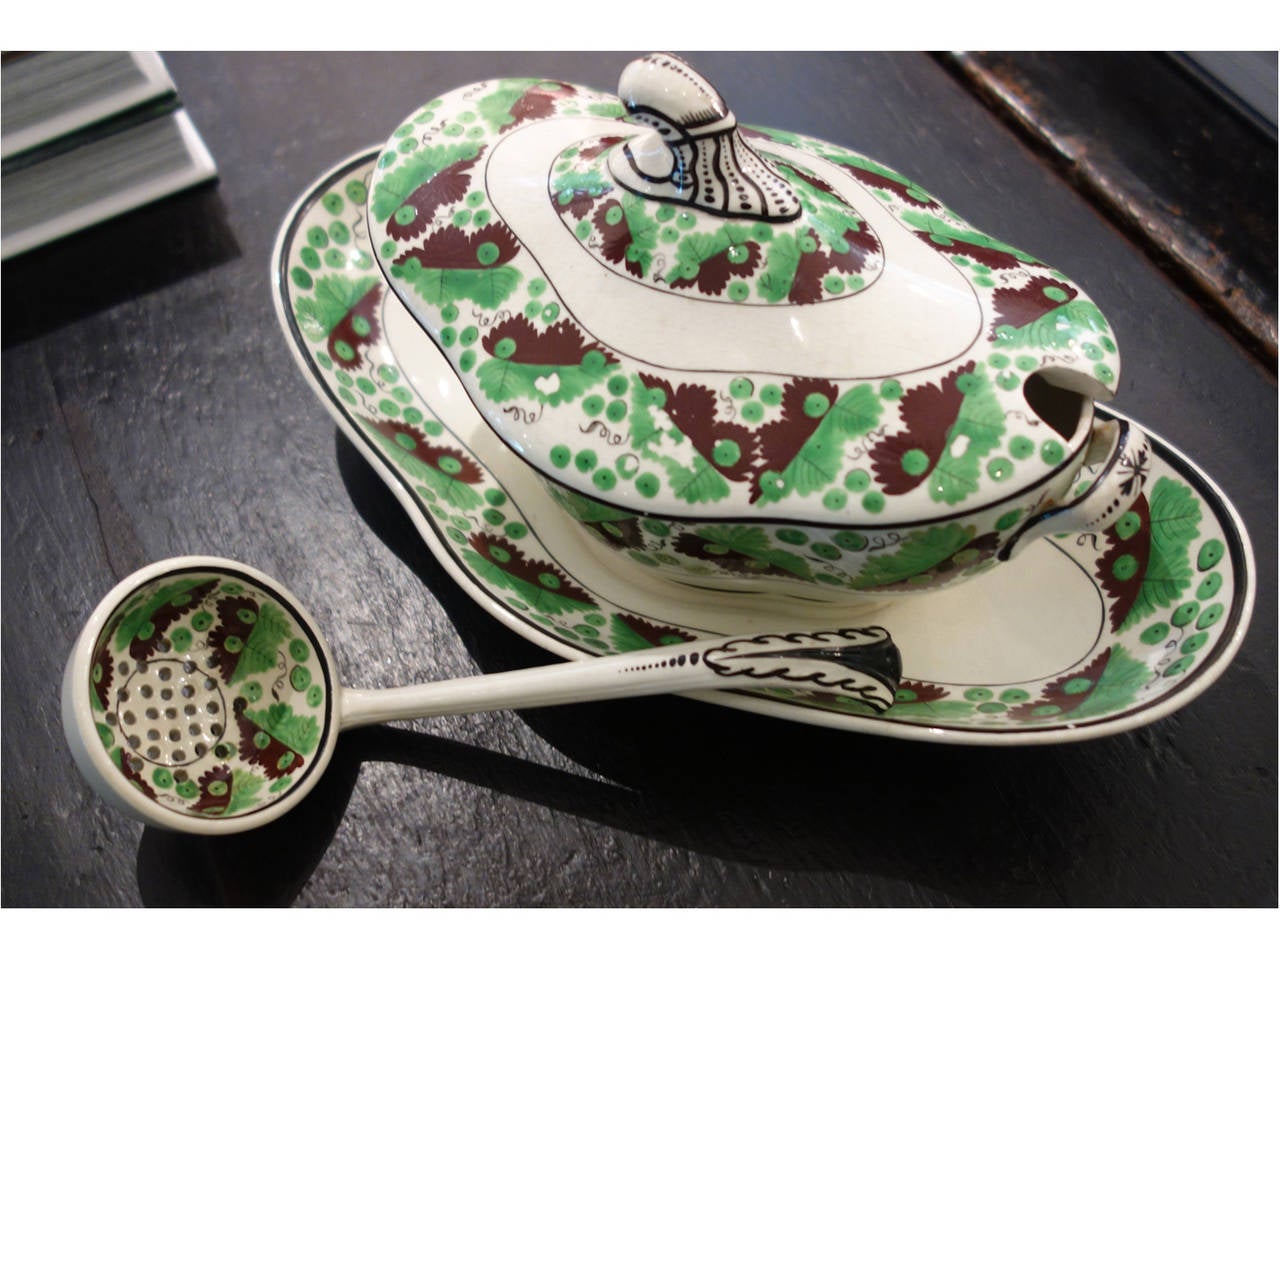 Assembled set of mid-19th century Spode creamware, green and brown oak leaf and acorn pattern.  Set includes:

complete covered gravy boat with pierced ladle 10